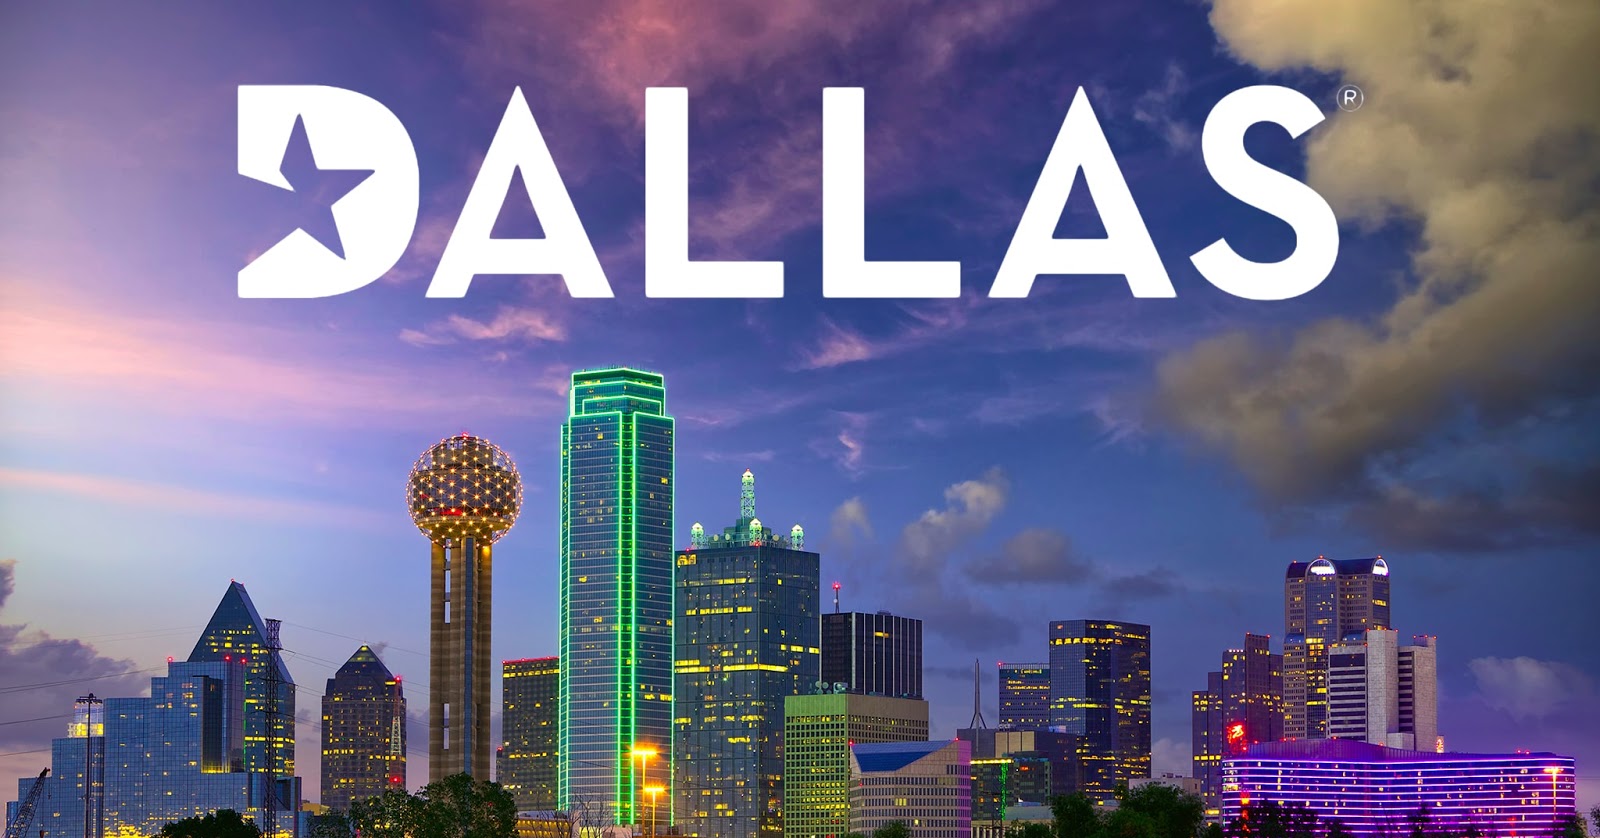 7 Things To Do In Dallas